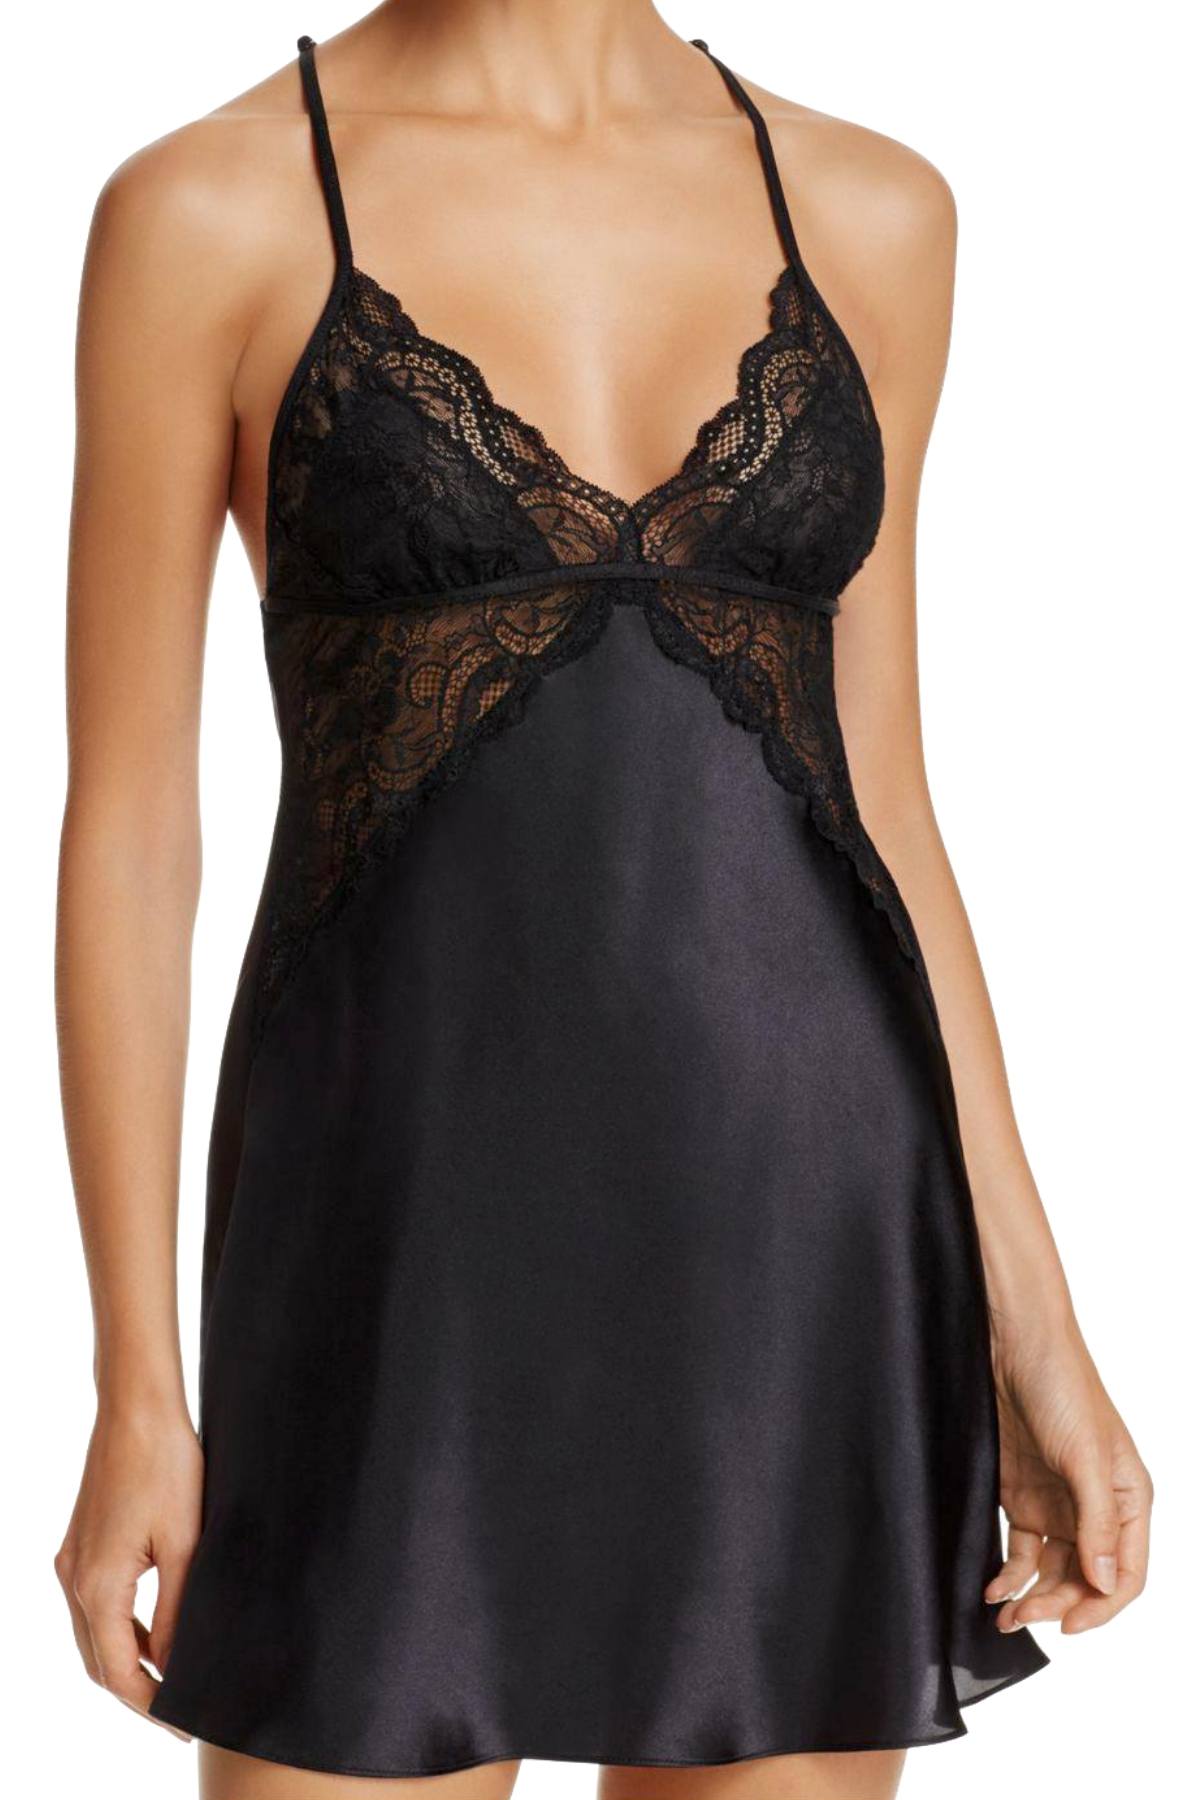 In Bloom by Jonquil Black Satin/Lace Shimmer Chemise